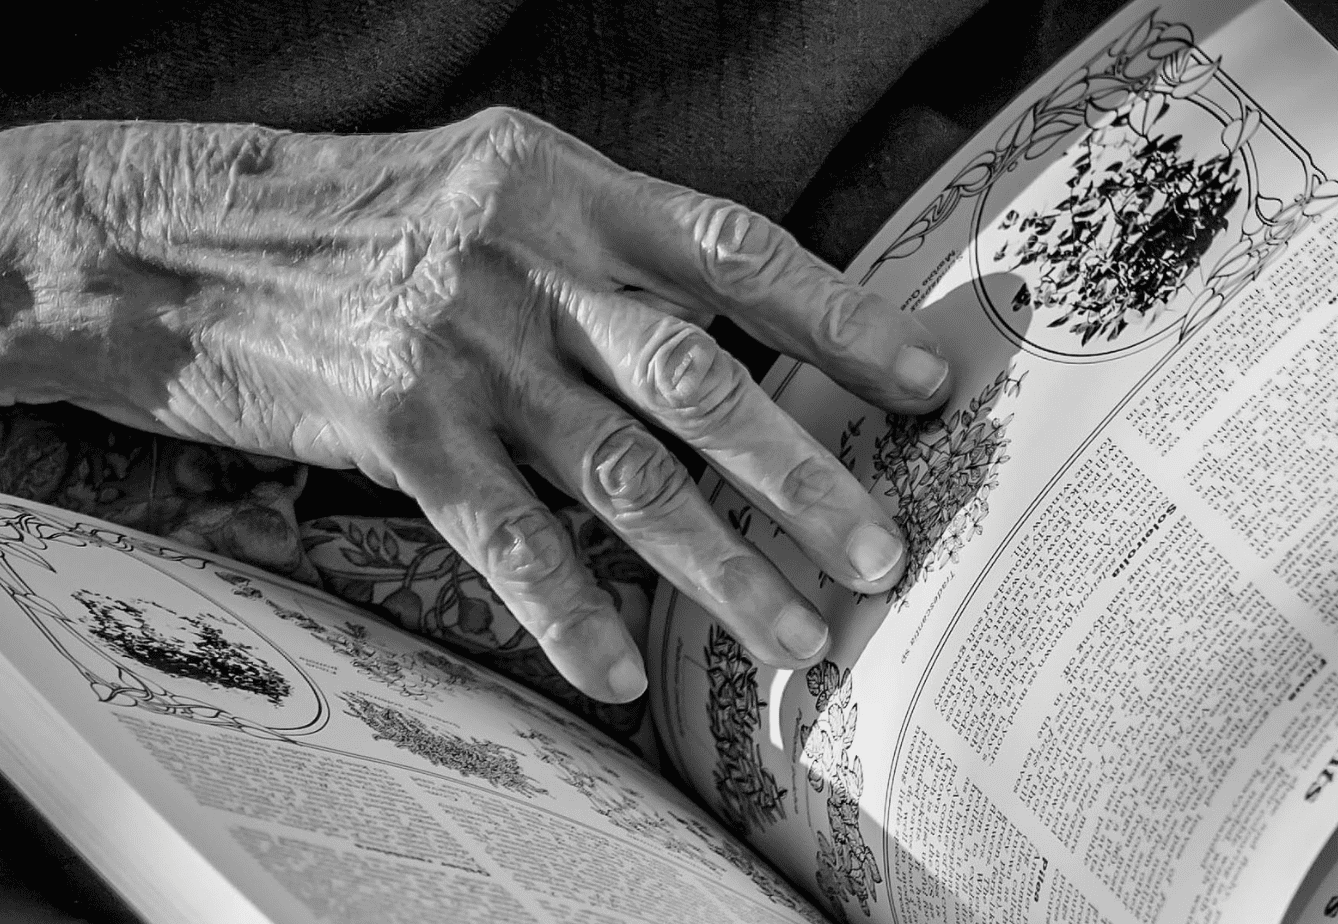 Old woman paging through a book. | Source: flickr.com